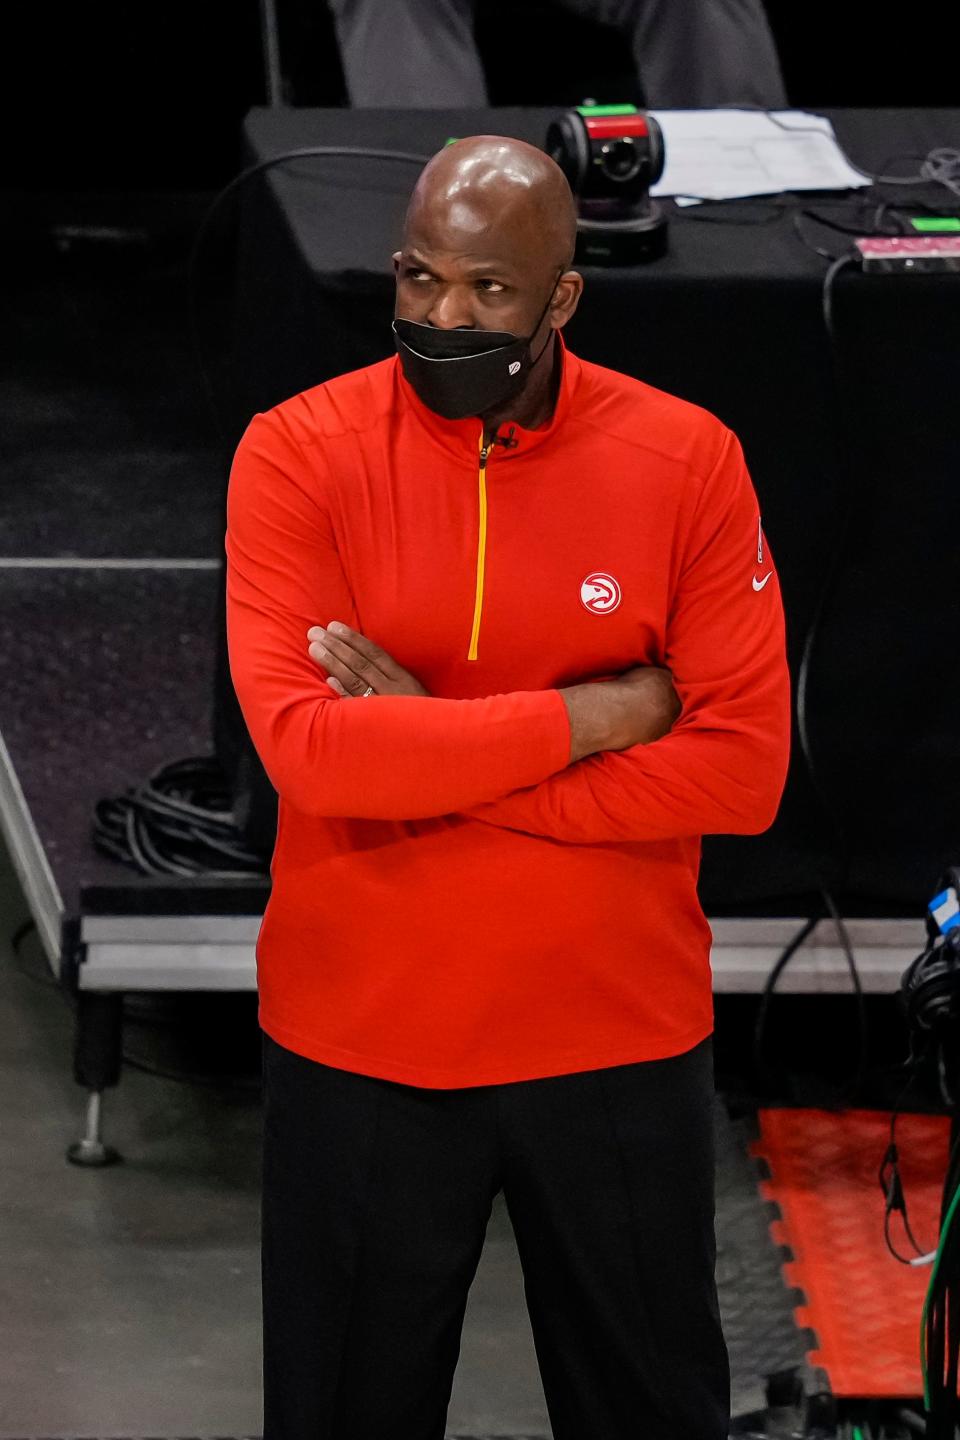 Atlanta Hawks interim head coach Nate McMillan watches the action from the bench against the Washington Wizards during the second half at State Farm Arena.